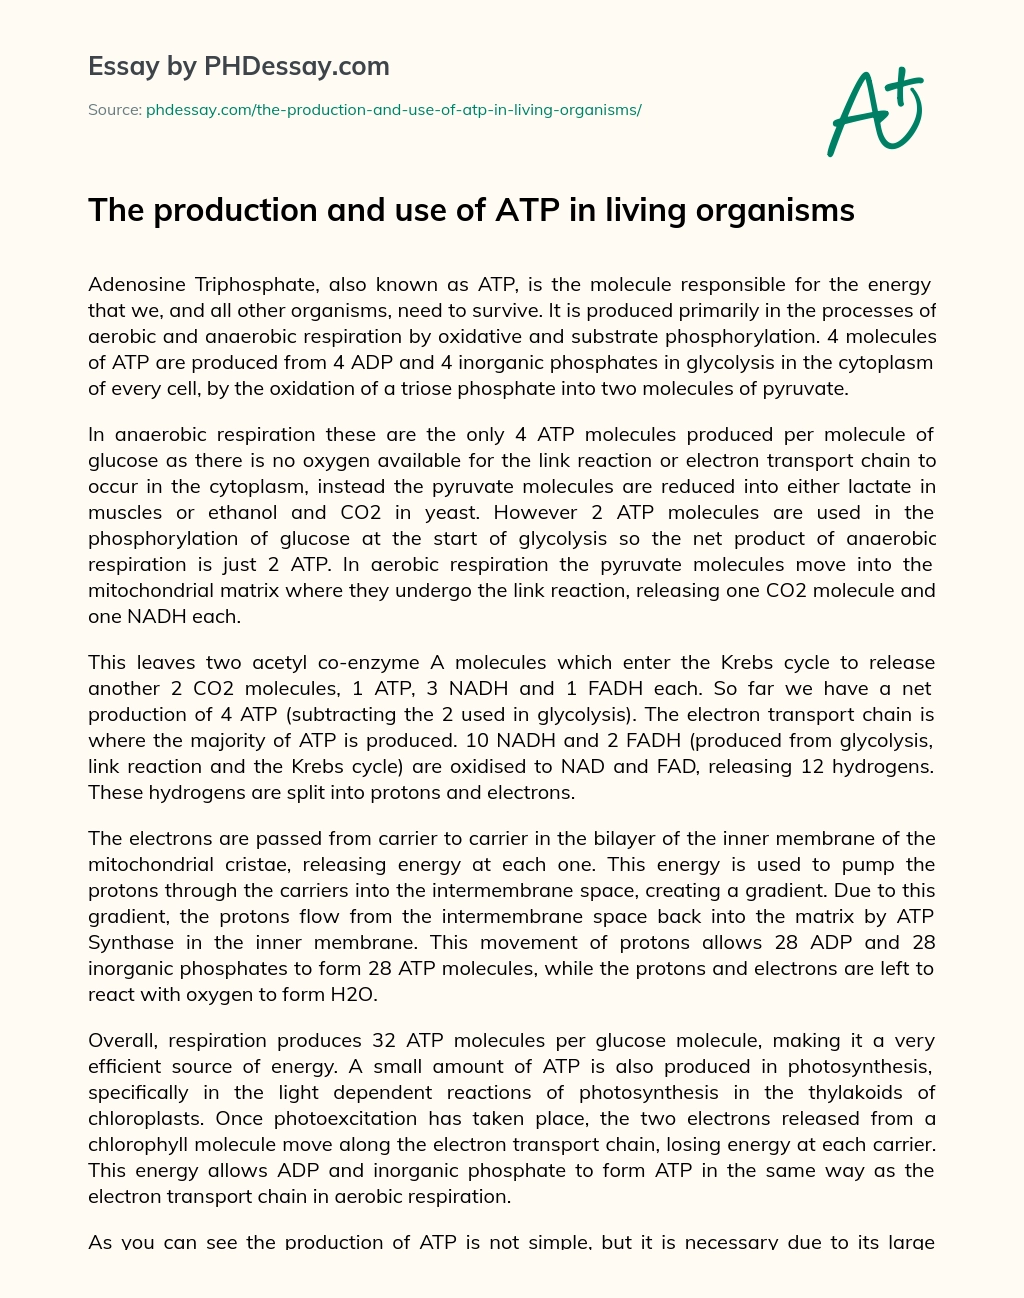 The production and use of ATP in living organisms essay